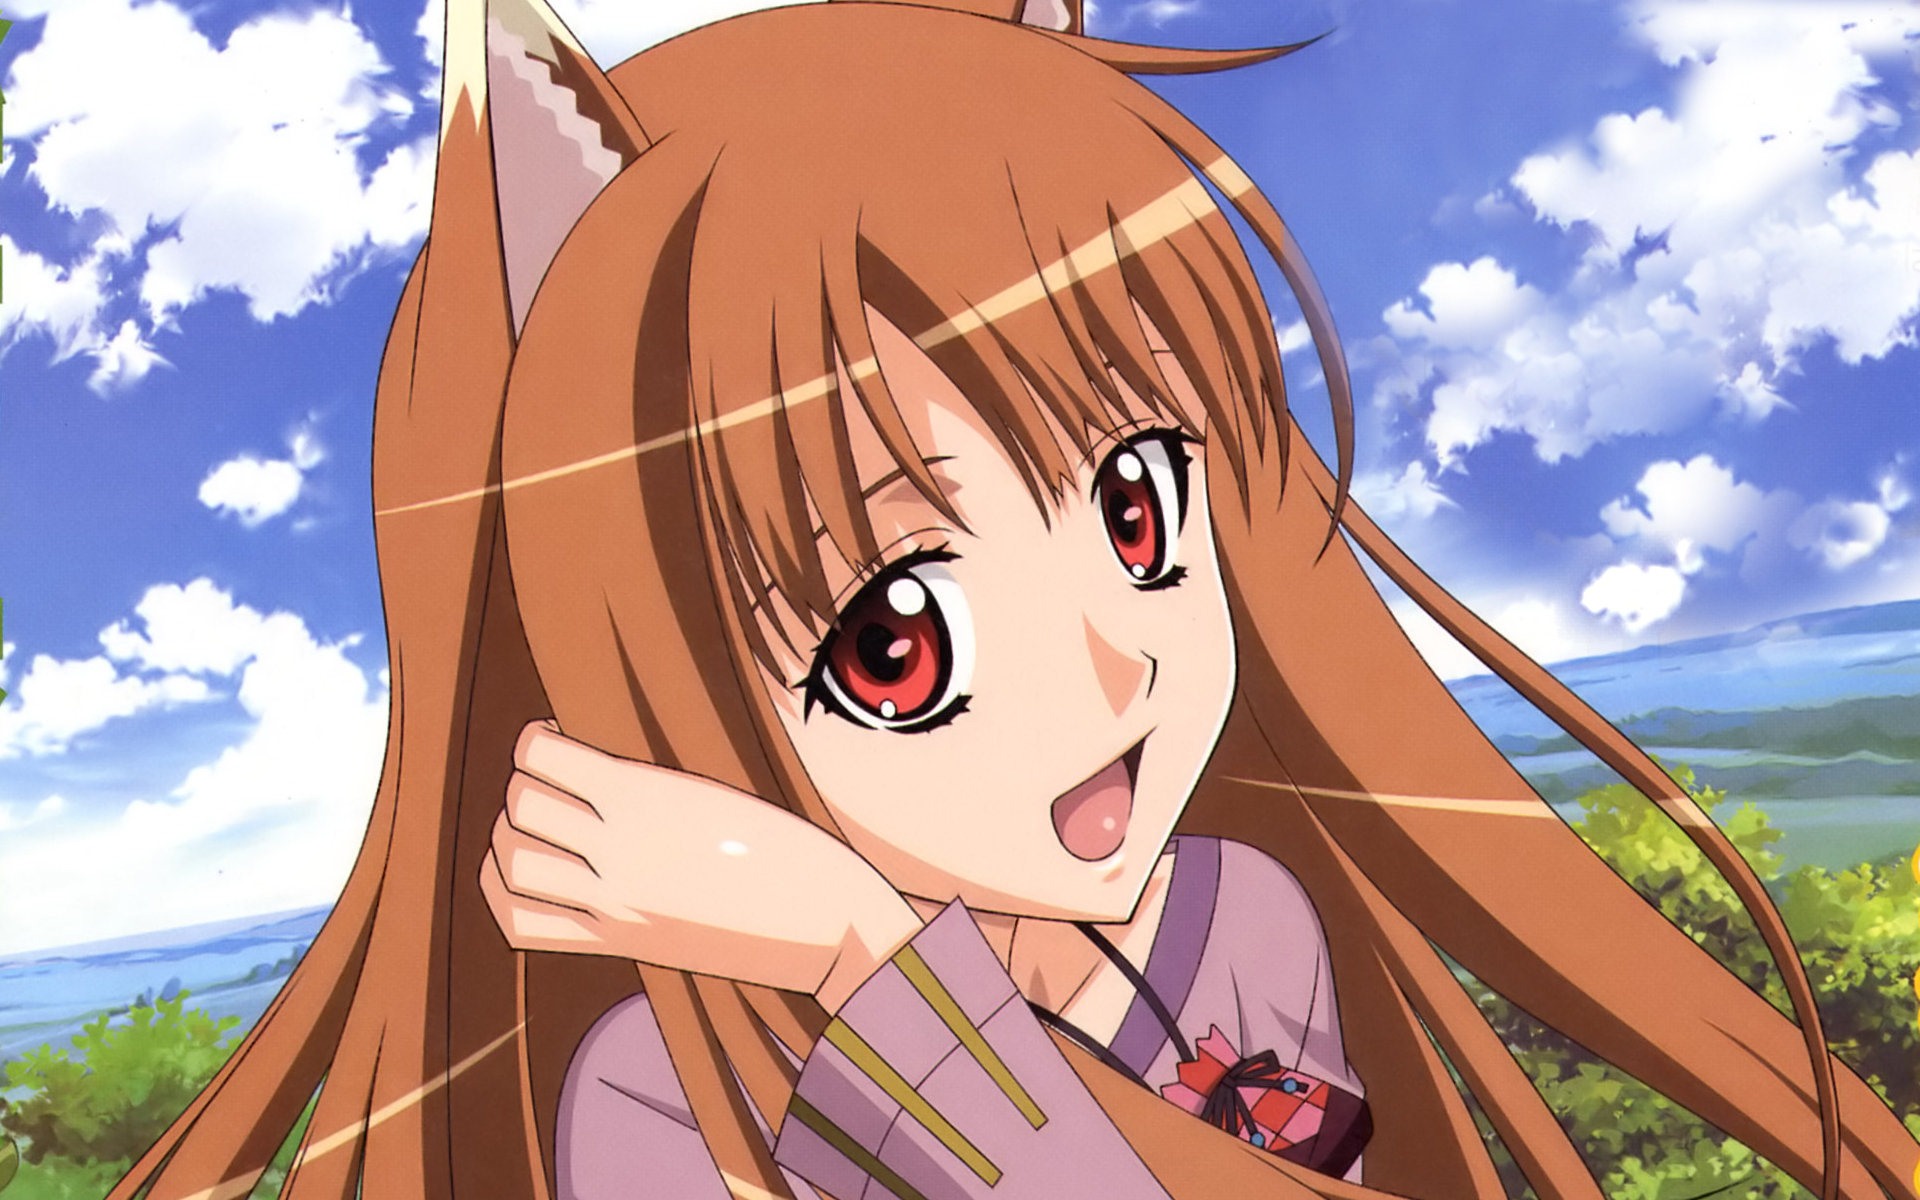 Spice and Wolf HD wallpapers #16 - 1920x1200